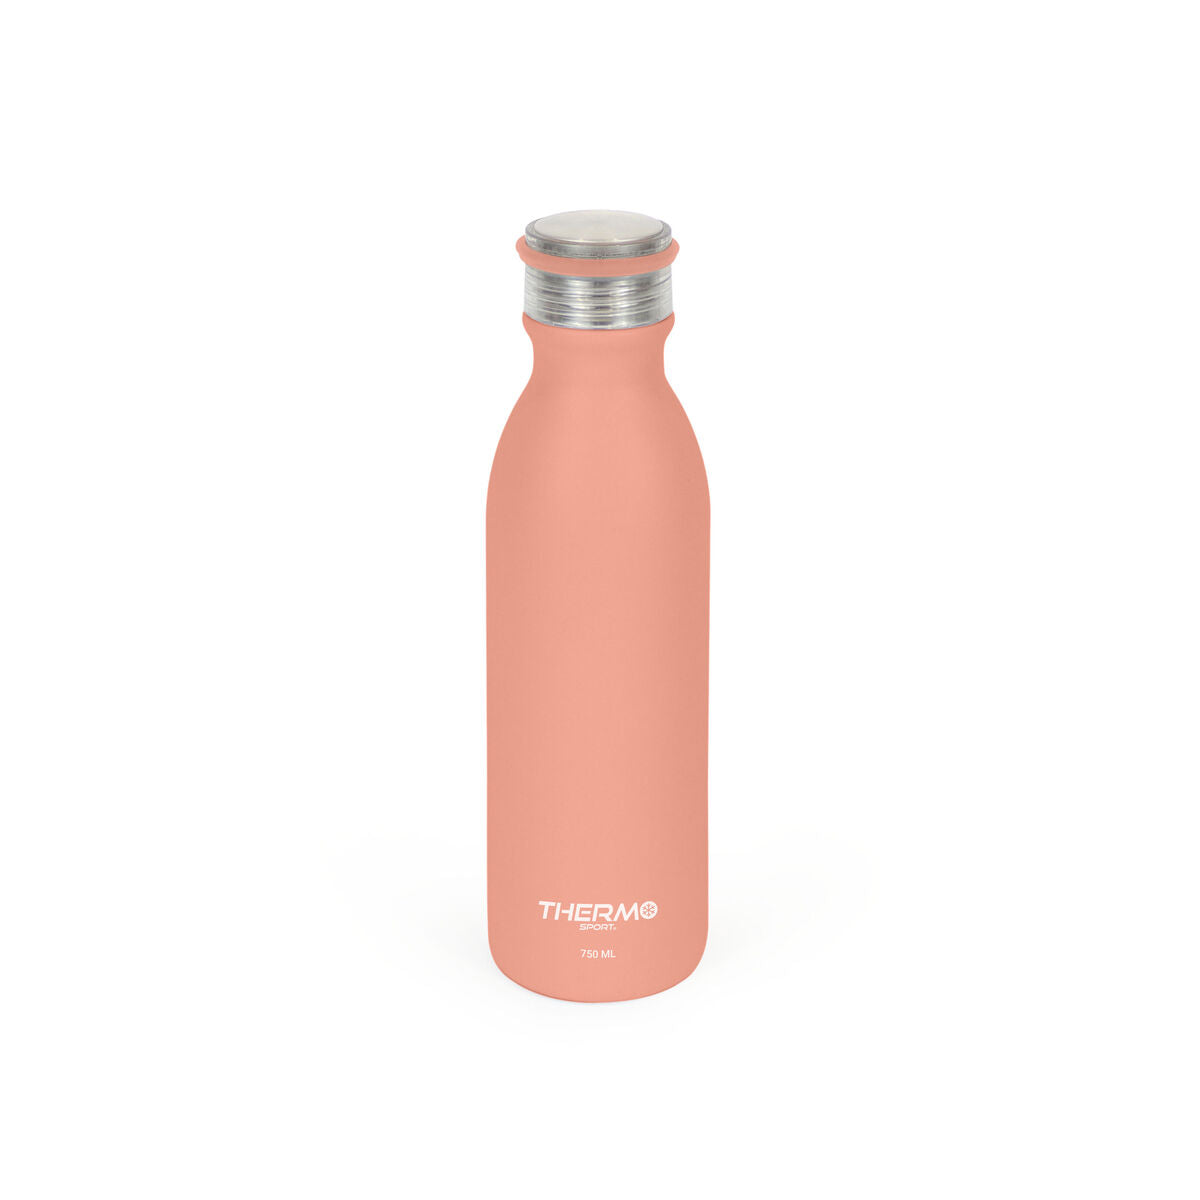 Thermosfles ThermoSport Roestvrij staal 750 ml